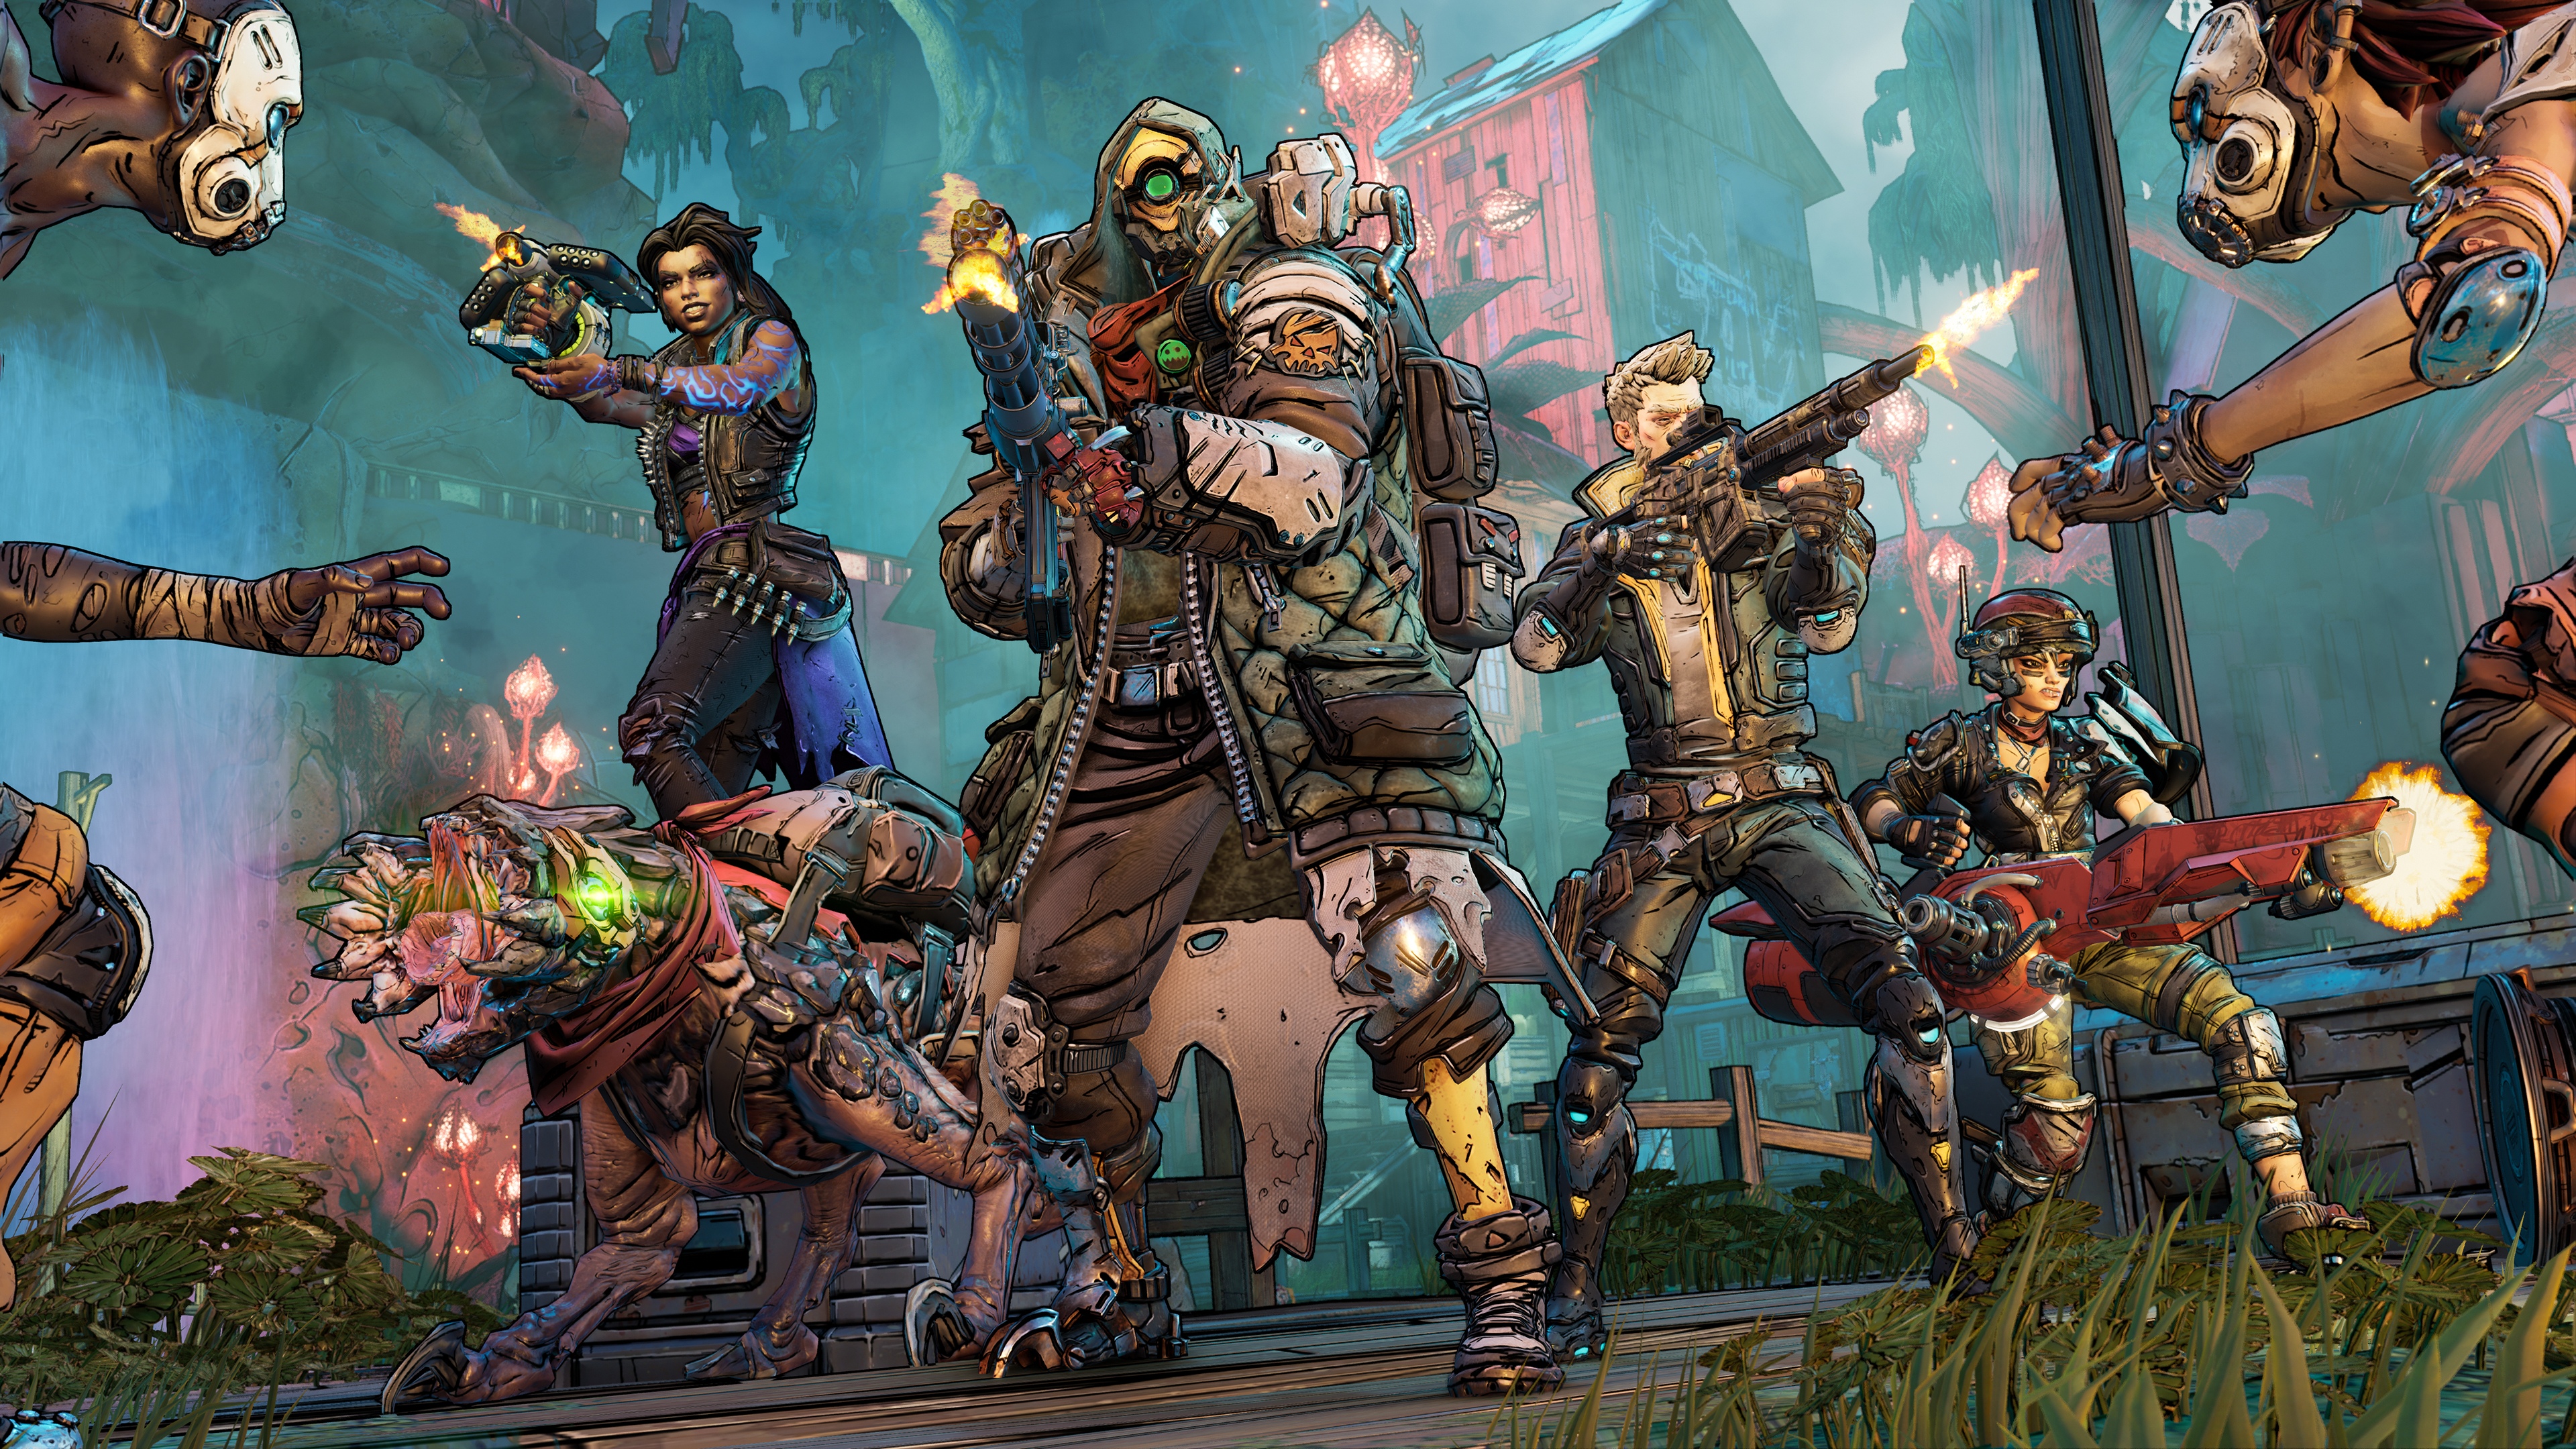 The crew of Borderlands including a cyborg dog, all in battle pose shooting at incoming enemies.